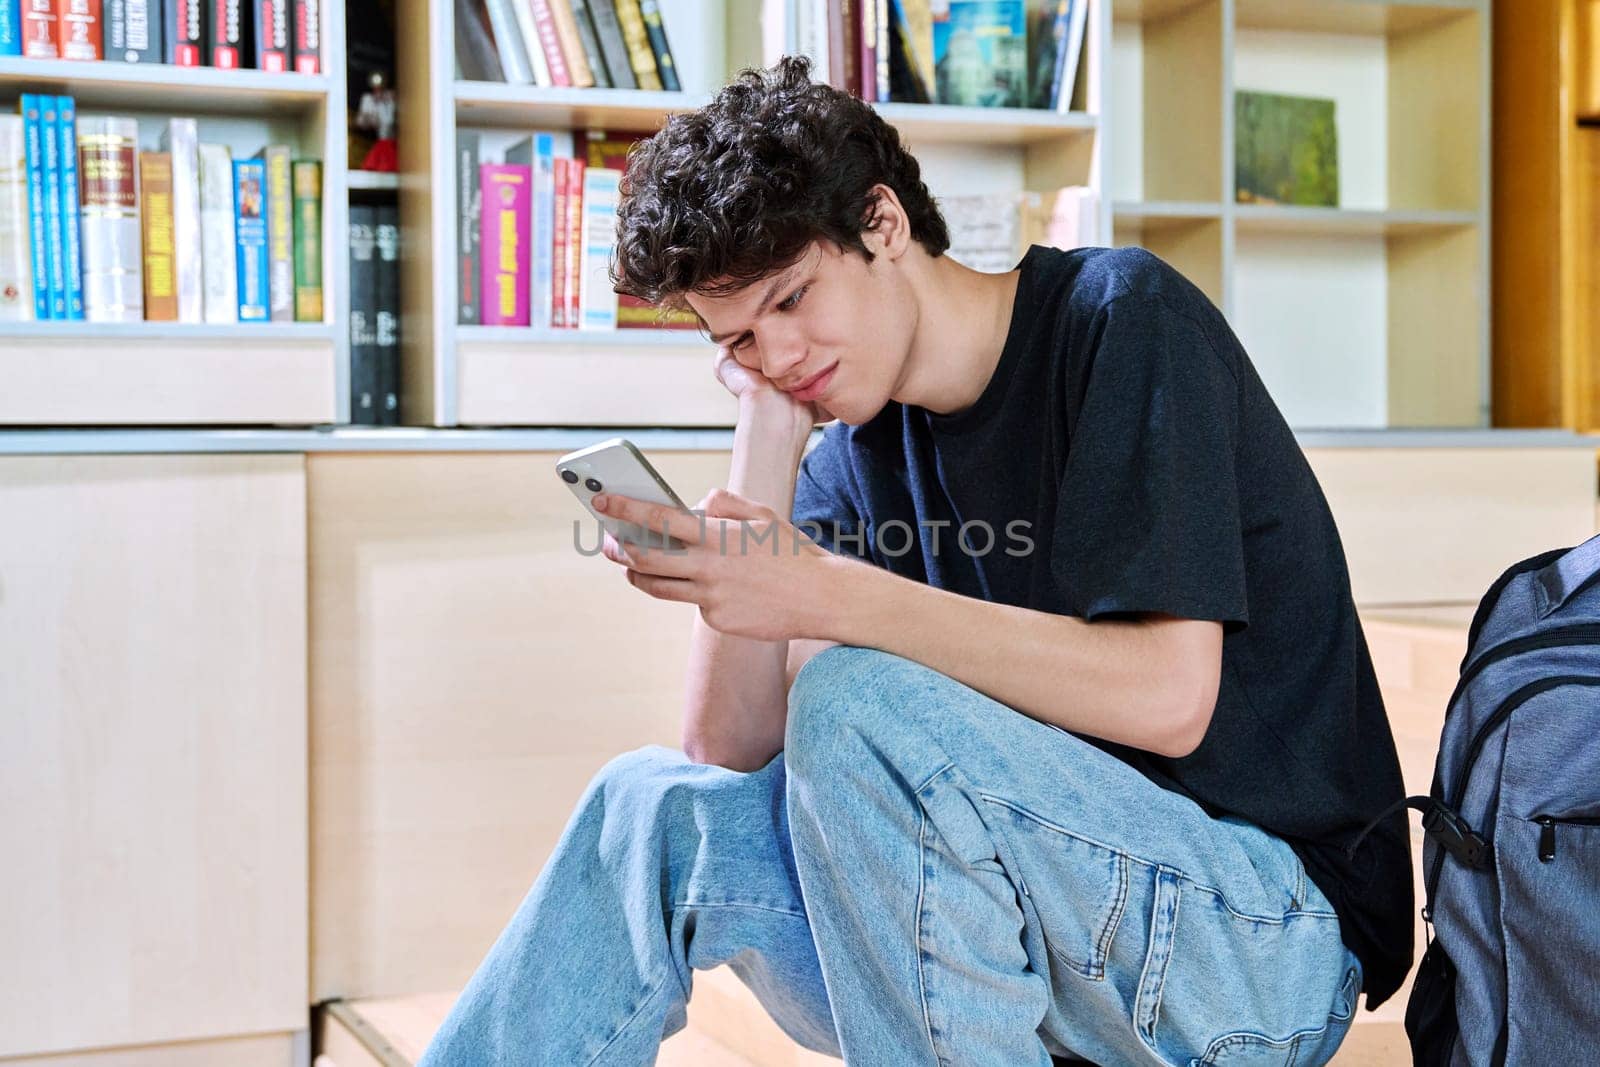 Sad upset young male college student looking at smartphone while sitting in classroom. Negative emotions, difficulties, troubles, youth concept